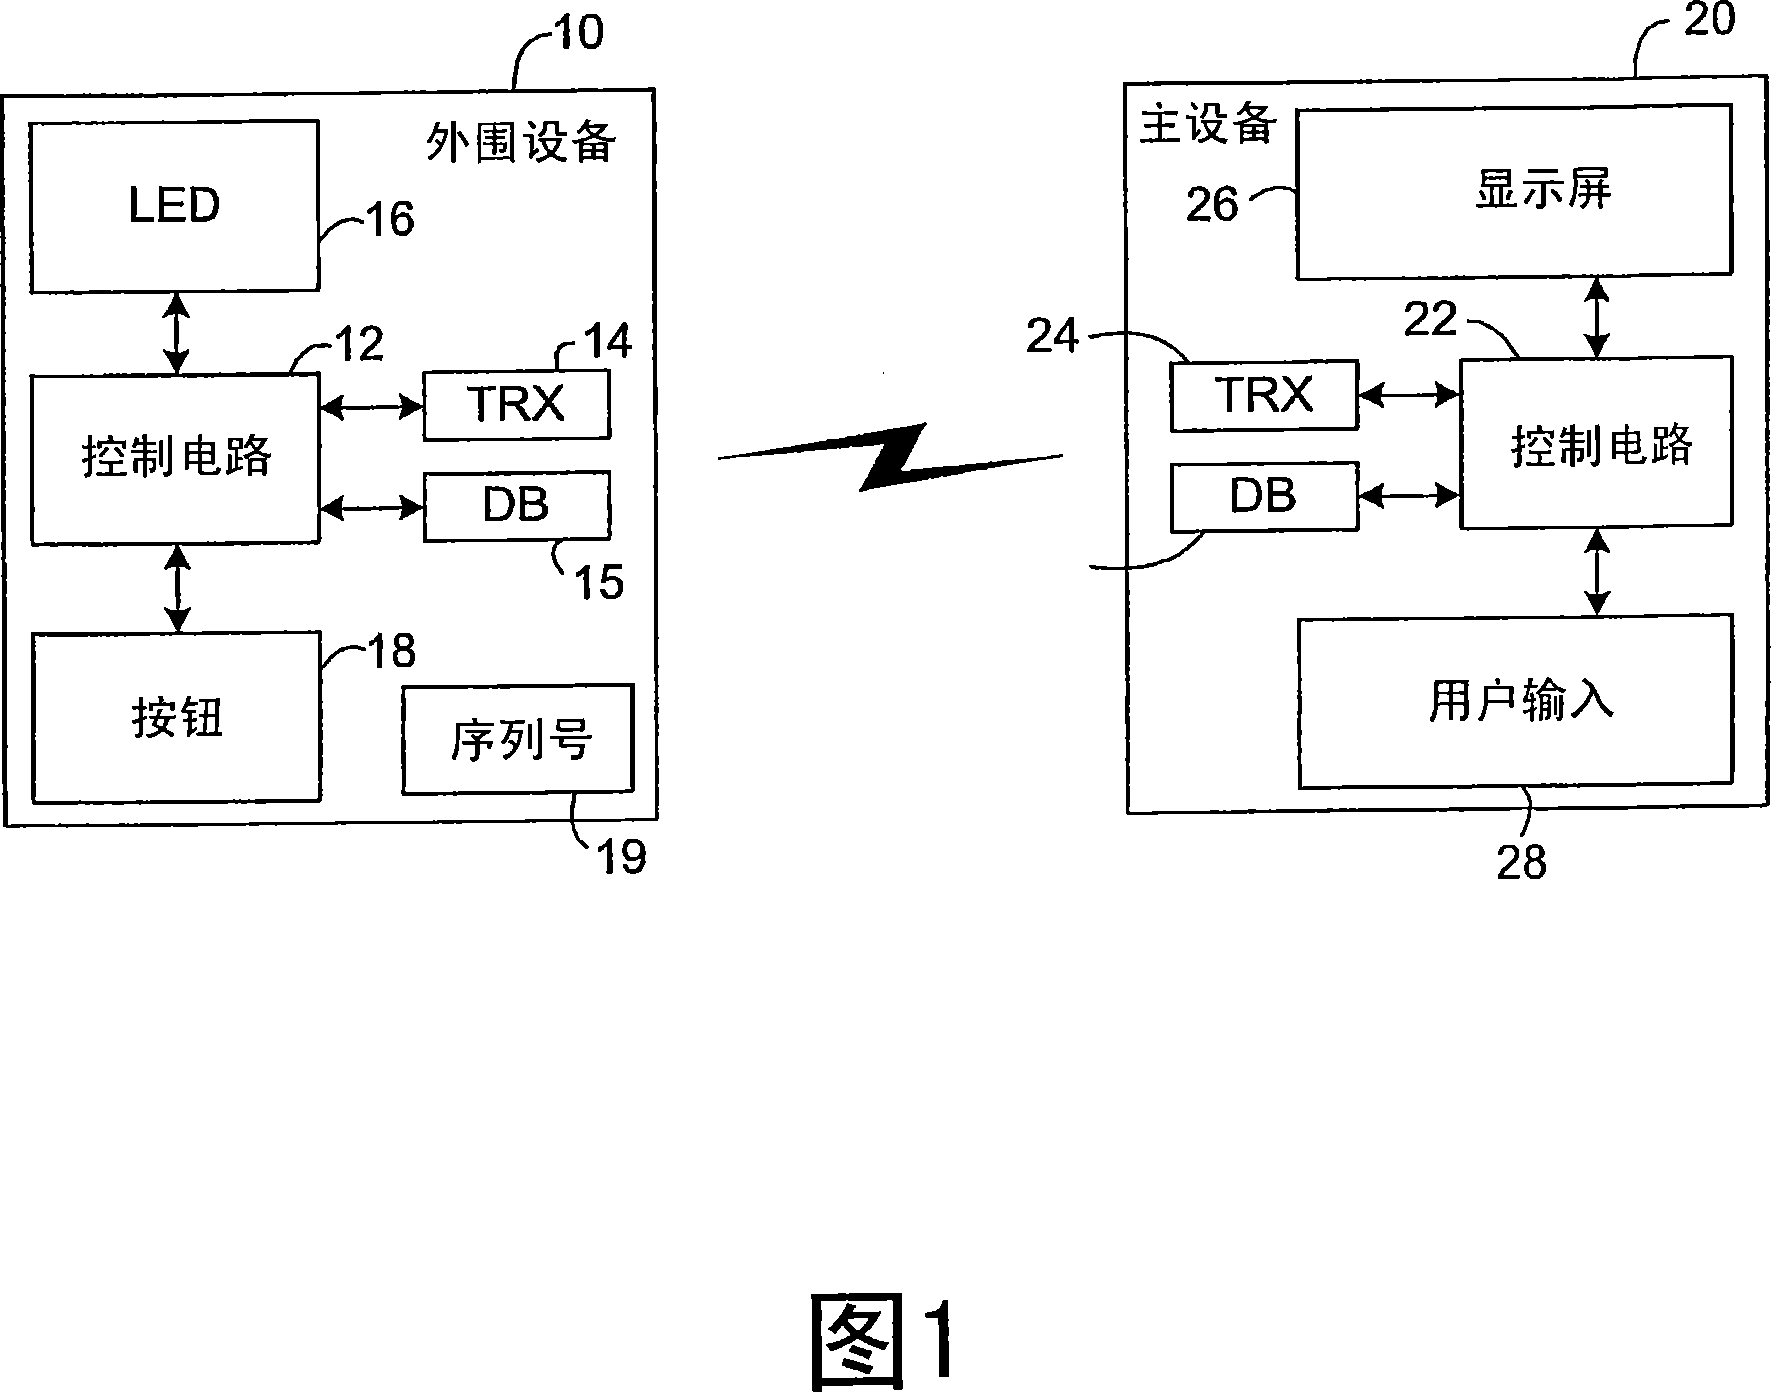 Secure pairing for wired or wireless communications devices